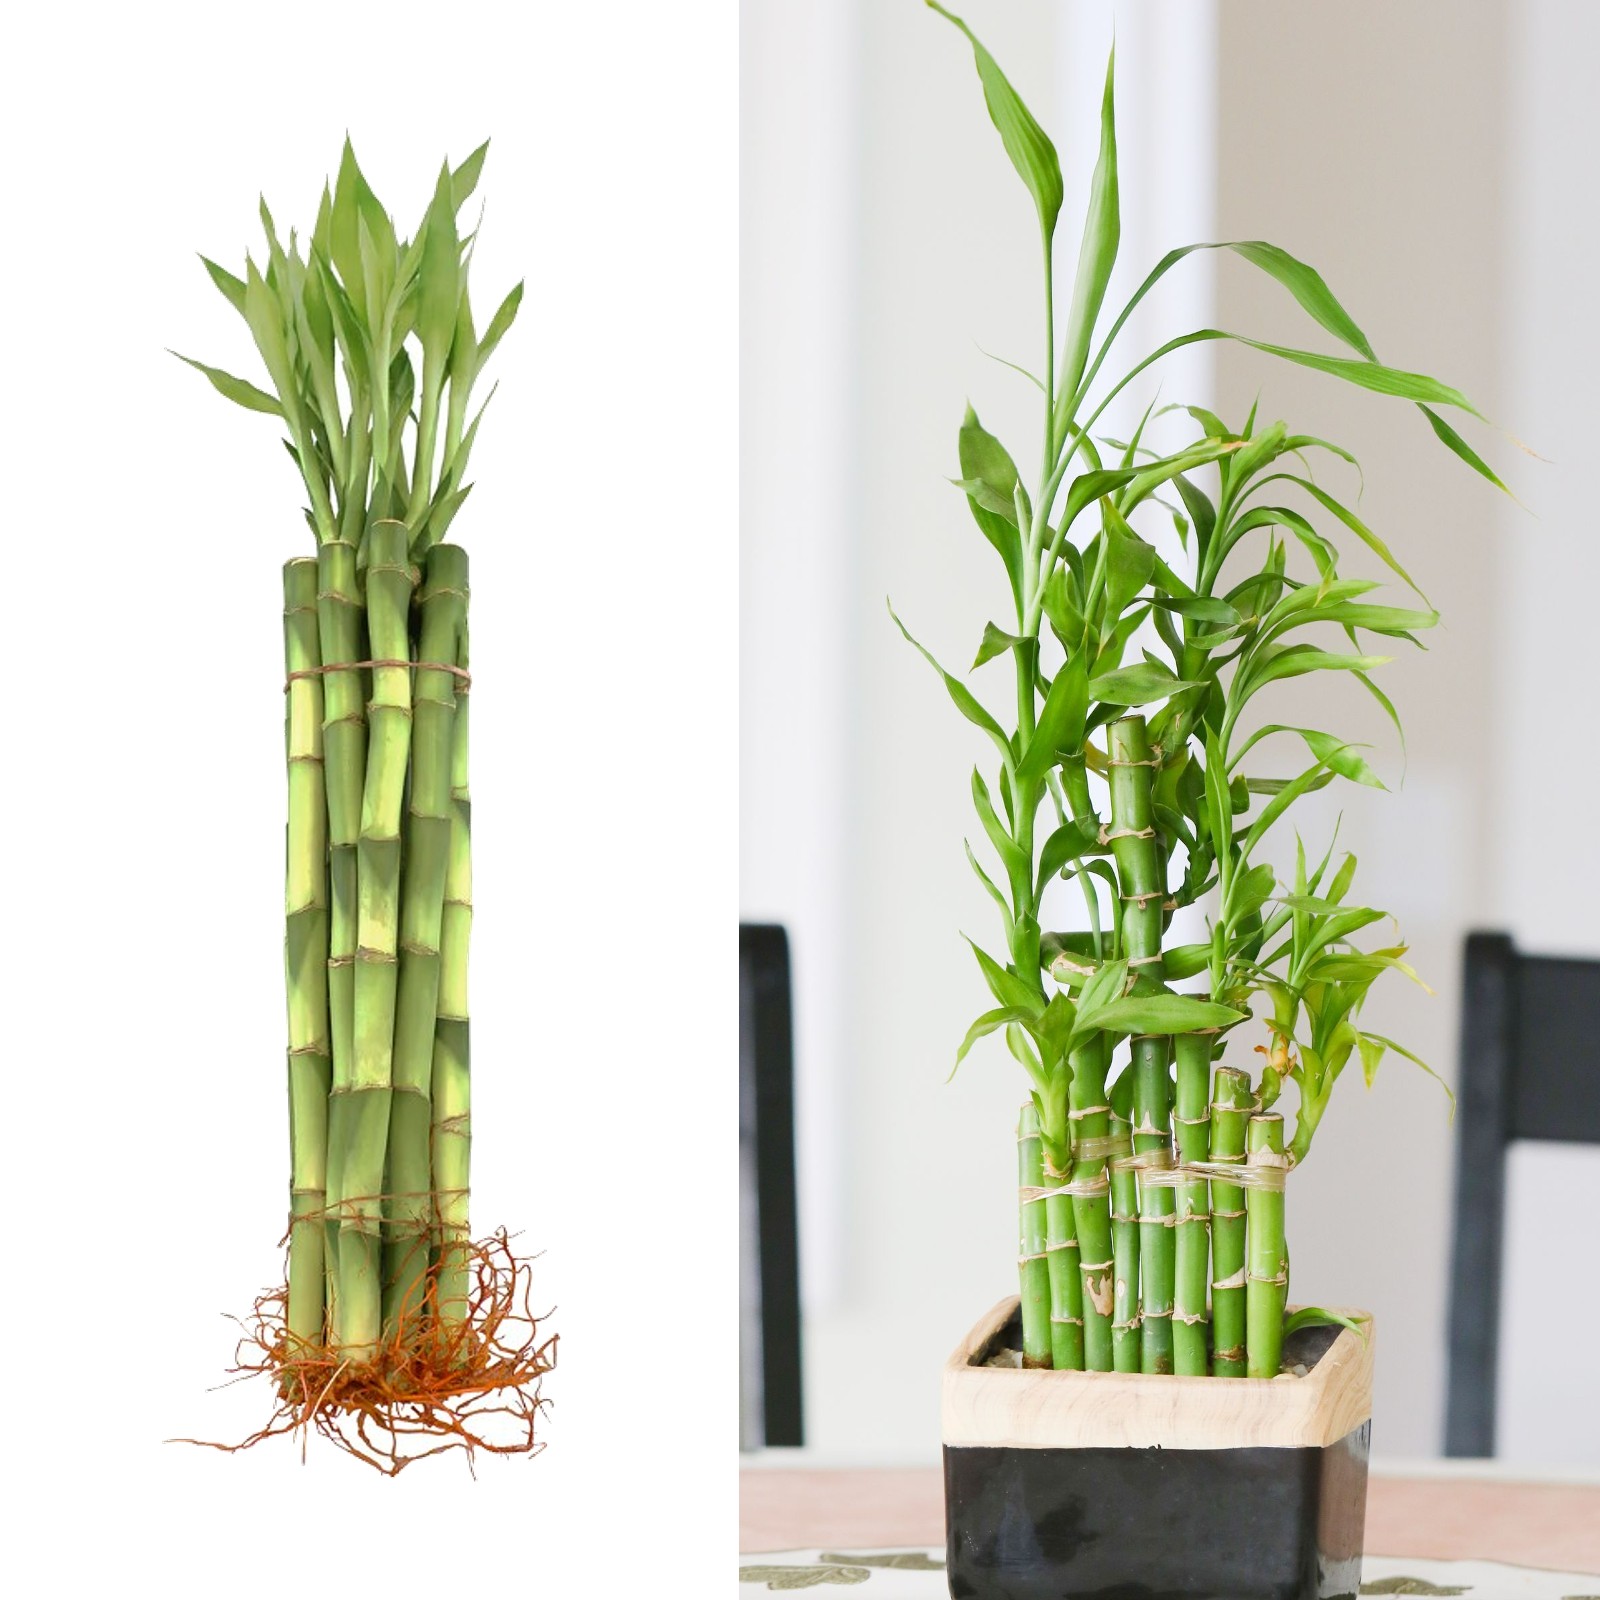 Lucky Bamboo 40cm 4 Straight Stems Carbeth Plants